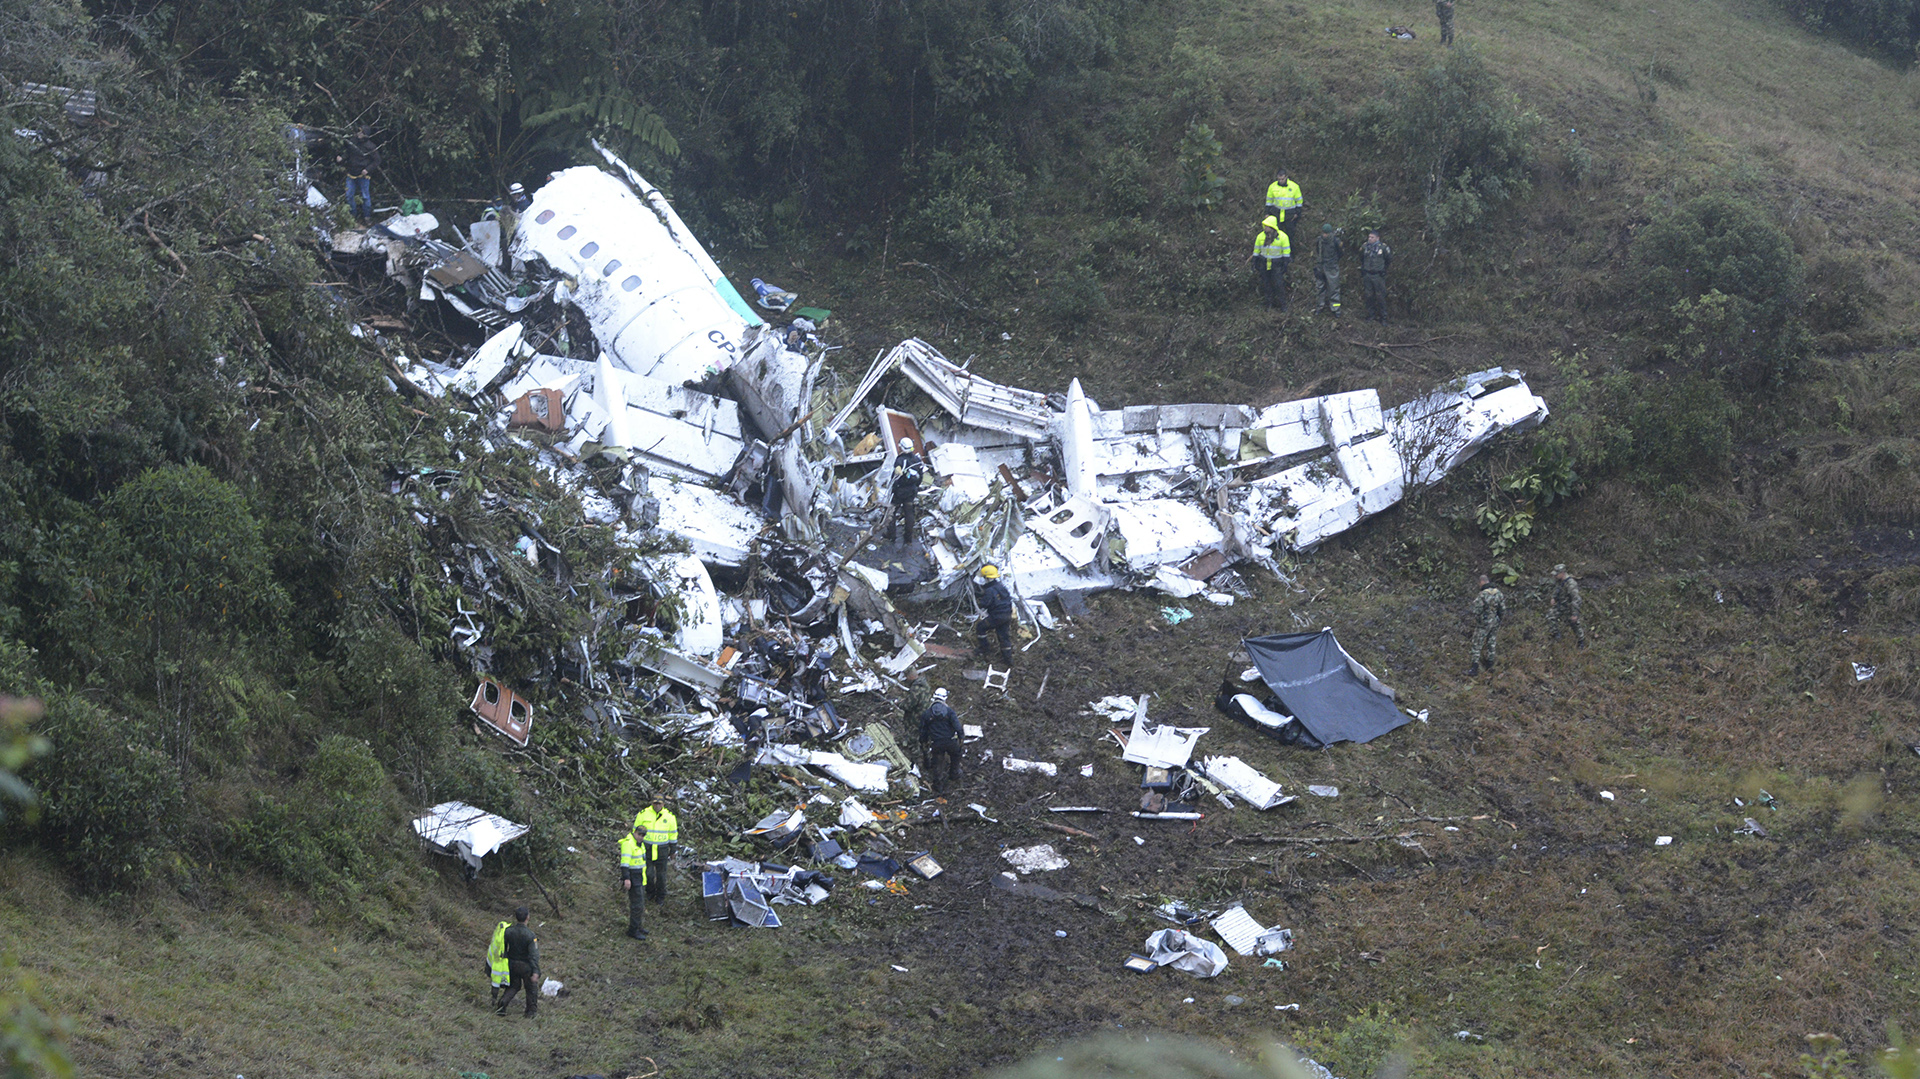 Police officers and rescue workers search for survivors around the wreckage of a chartered airplane that crashed in La Union, a mountainous area outside Medellin, Colombia, Wednesday , Nov. 30, 2016. The plane was carrying the Brazilian first division soccer club Chapecoense team that was on it's way for a Copa Sudamericana final match against Colombia's Atletico Nacional. (AP Photo/Luis Benavides)